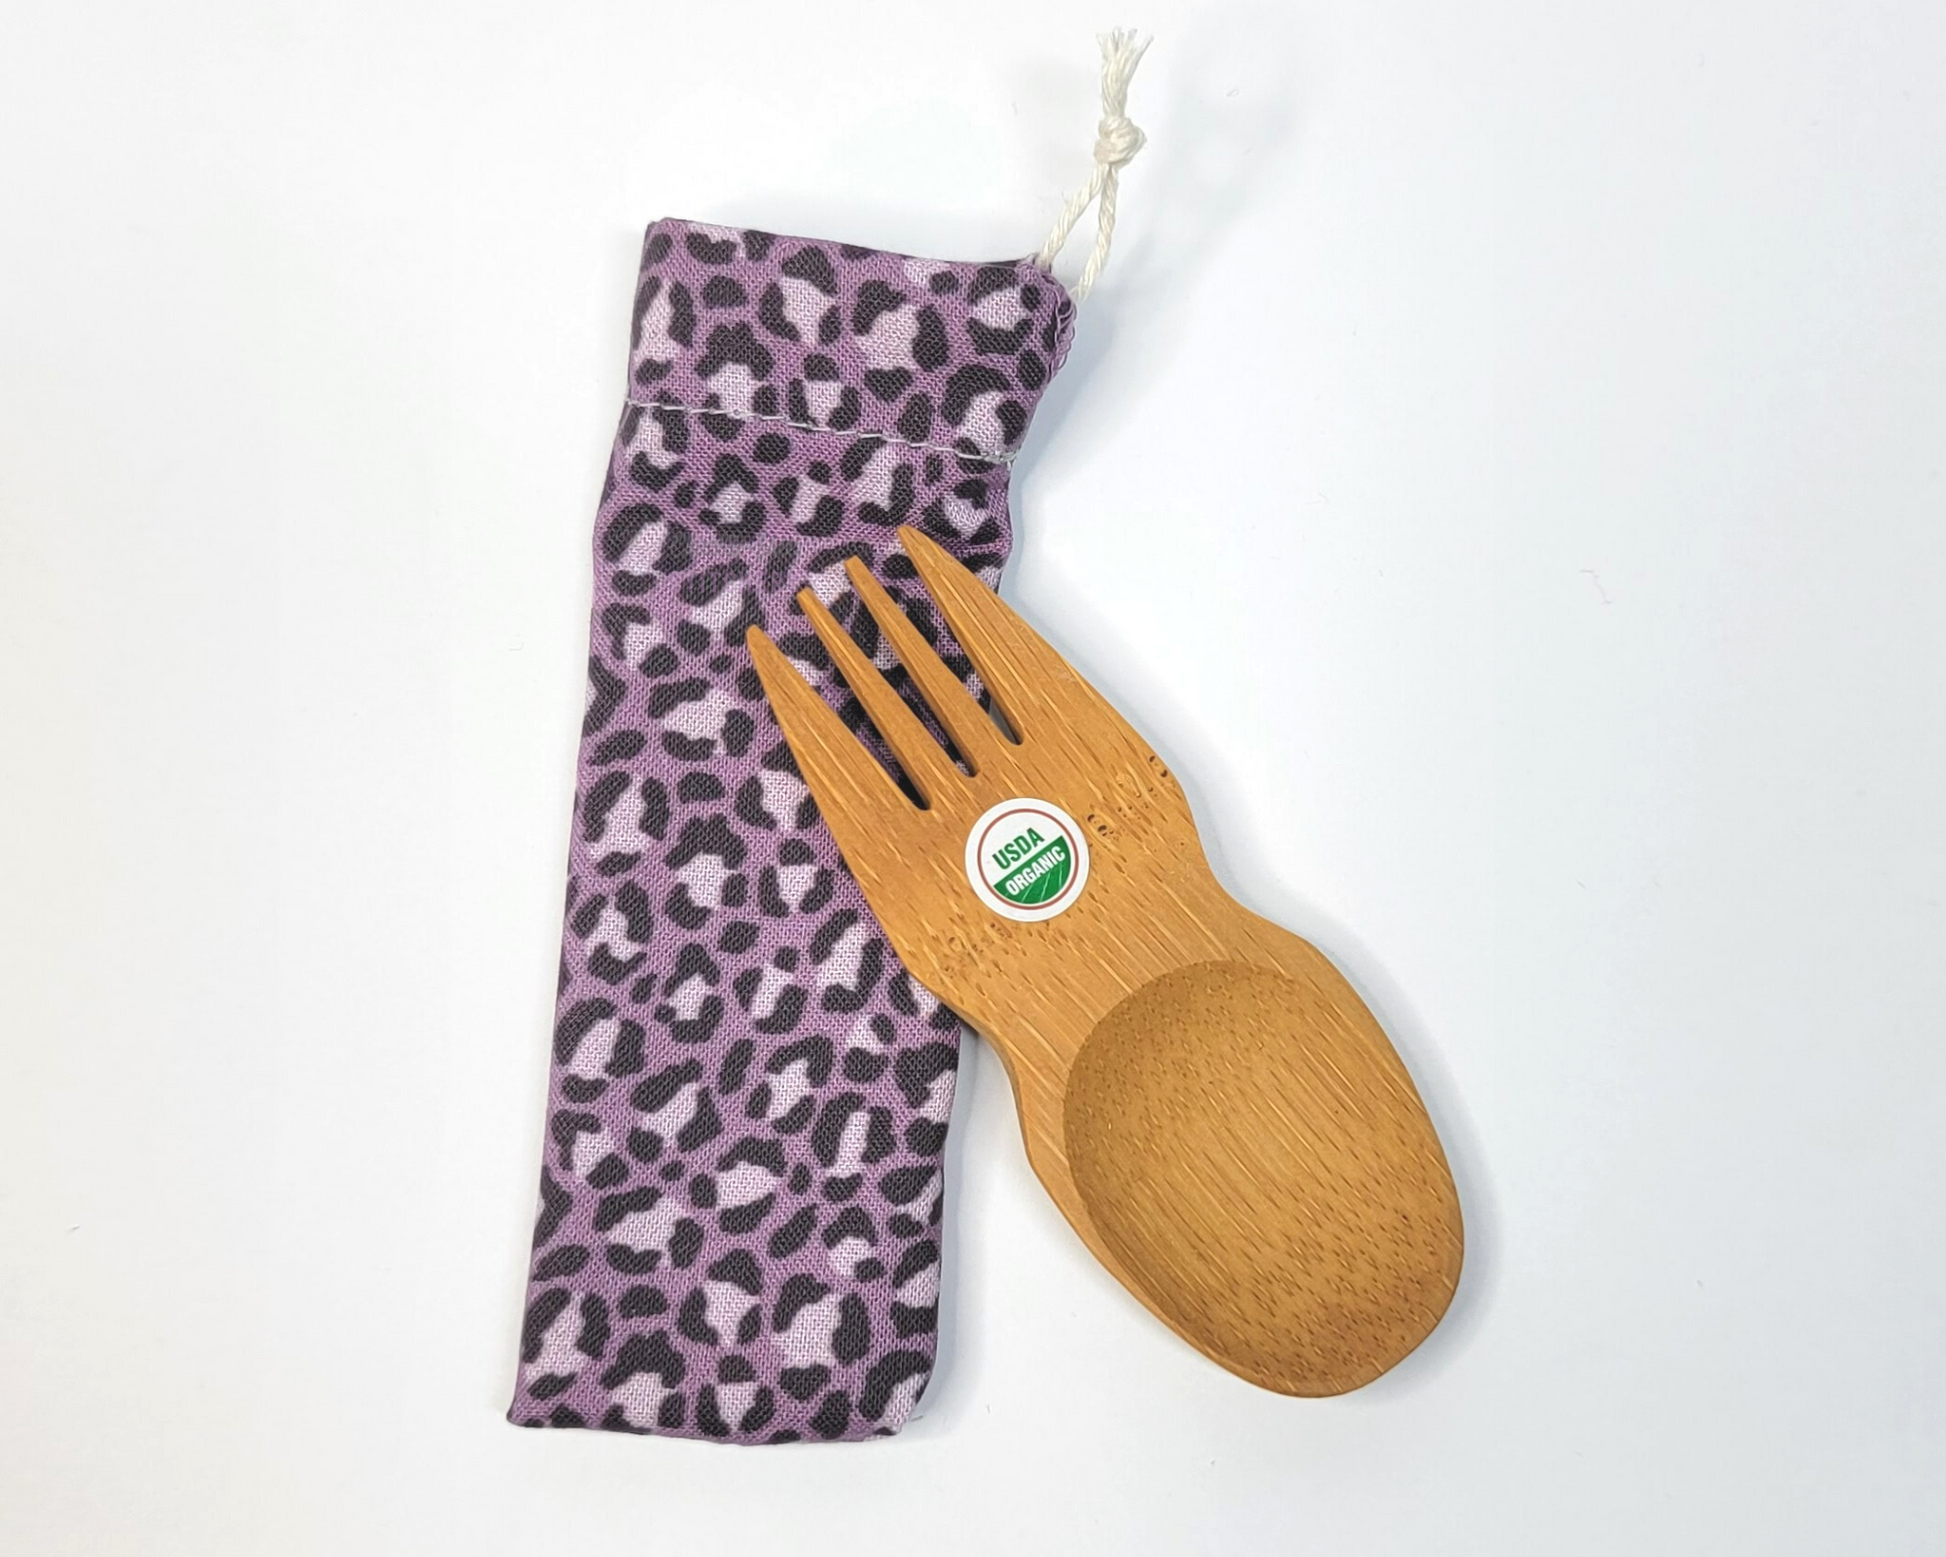 Reusable bamboo spork with pouch. The pouch is a muted violet leopard print. The pouch is sitting diagonally with the spork partially on top pointing the other way. The spork is small, a double ended fork and spoon.